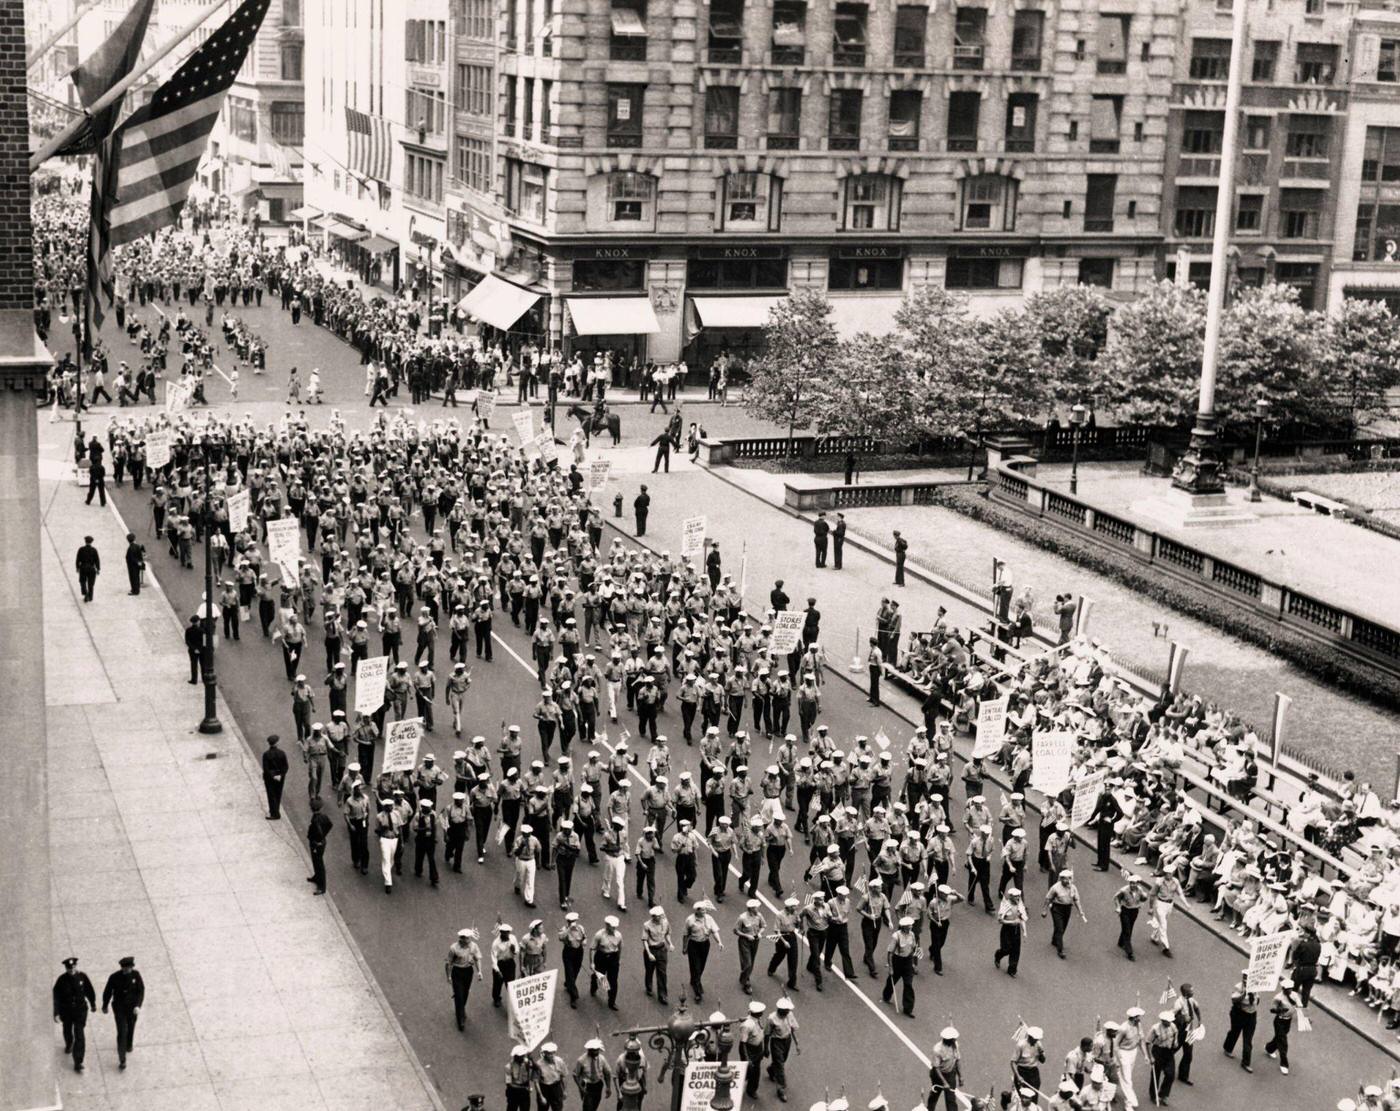 Union Parade On Fifth Avenue, Members Of The American Federation Of Labor Unions Participate In A Parade, Manhattan, 1939